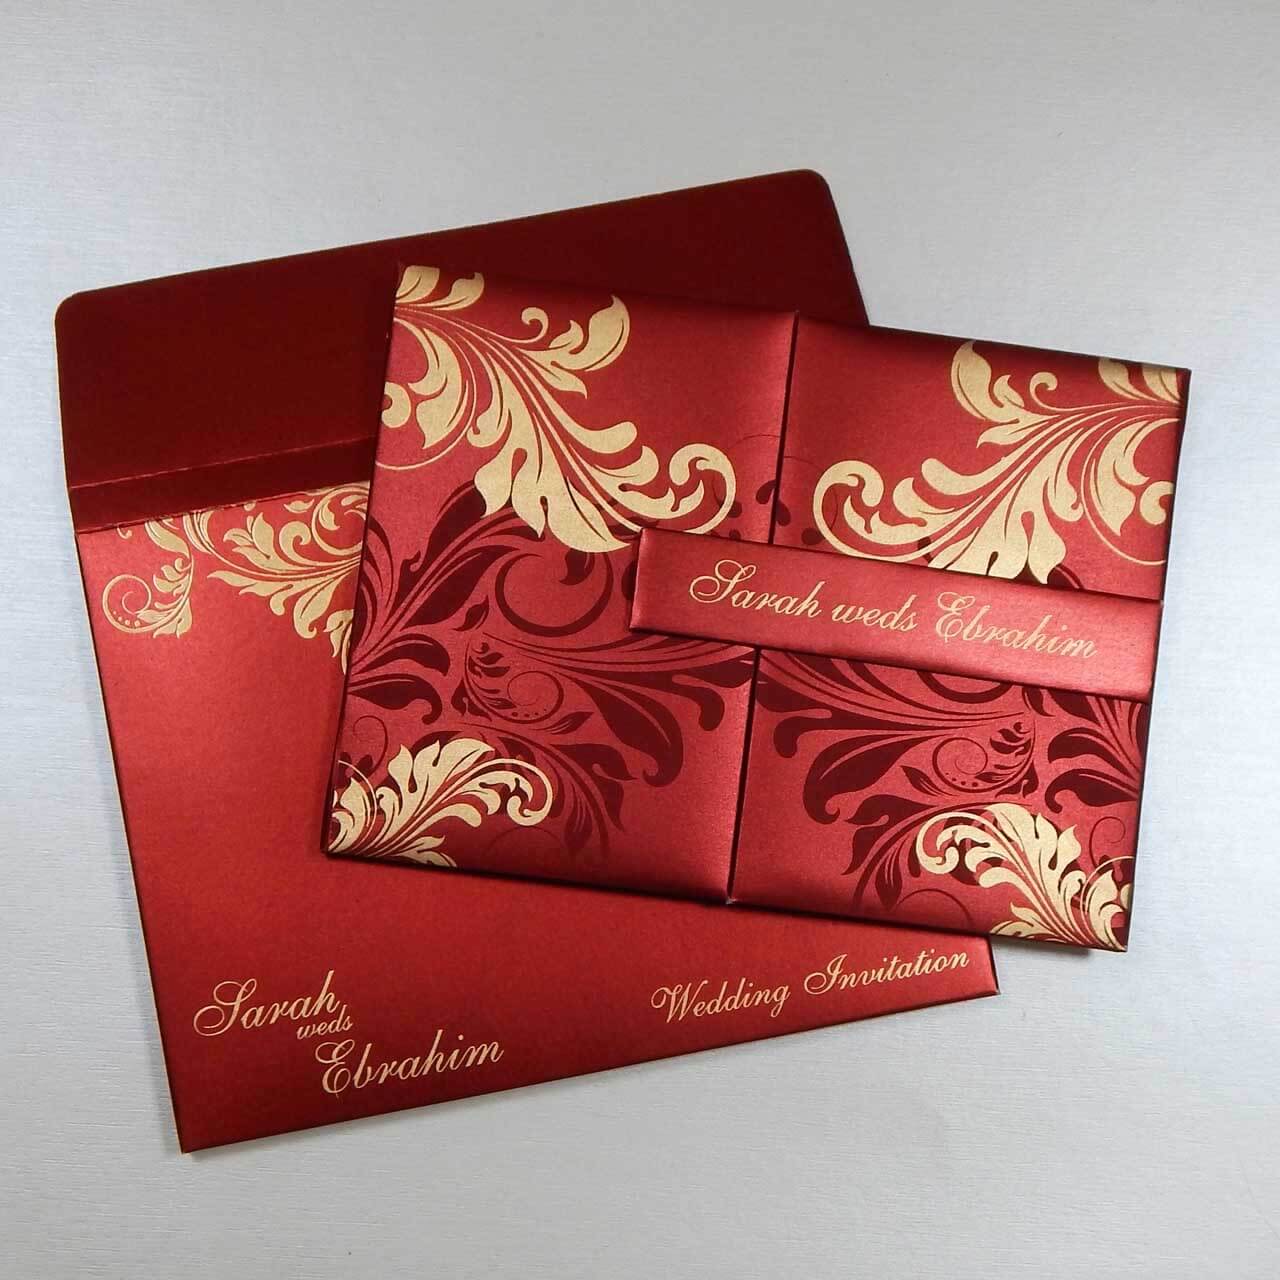 Significance of Wedding Cards in Wedding